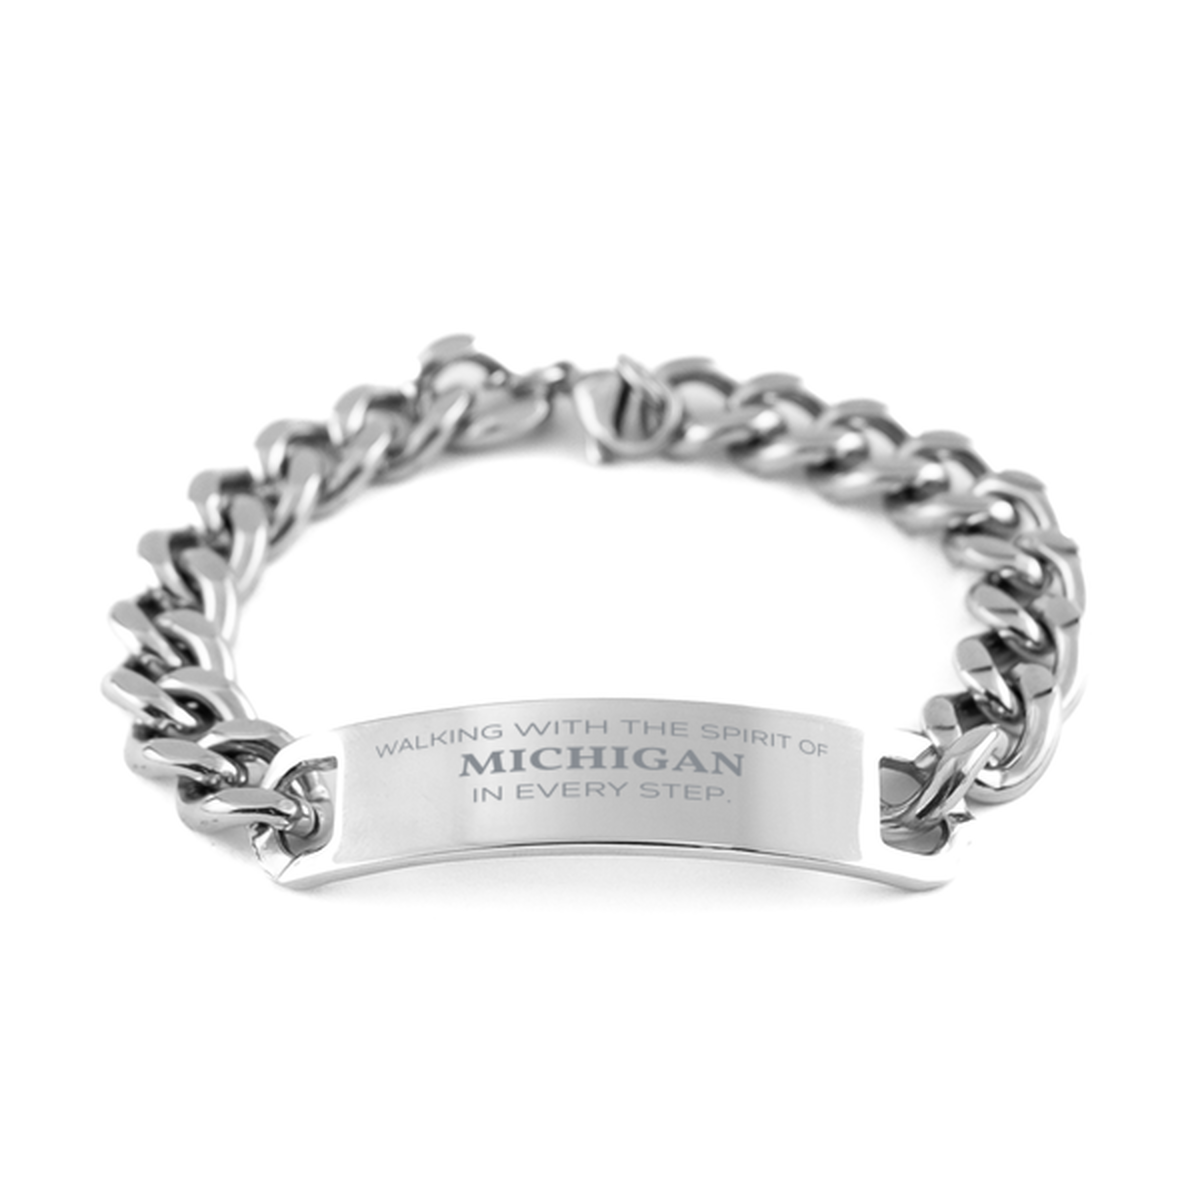 Michigan Gifts, Walking with the spirit, Love Michigan Birthday Christmas Cuban Chain Stainless Steel Bracelet For Michigan People, Men, Women, Friends